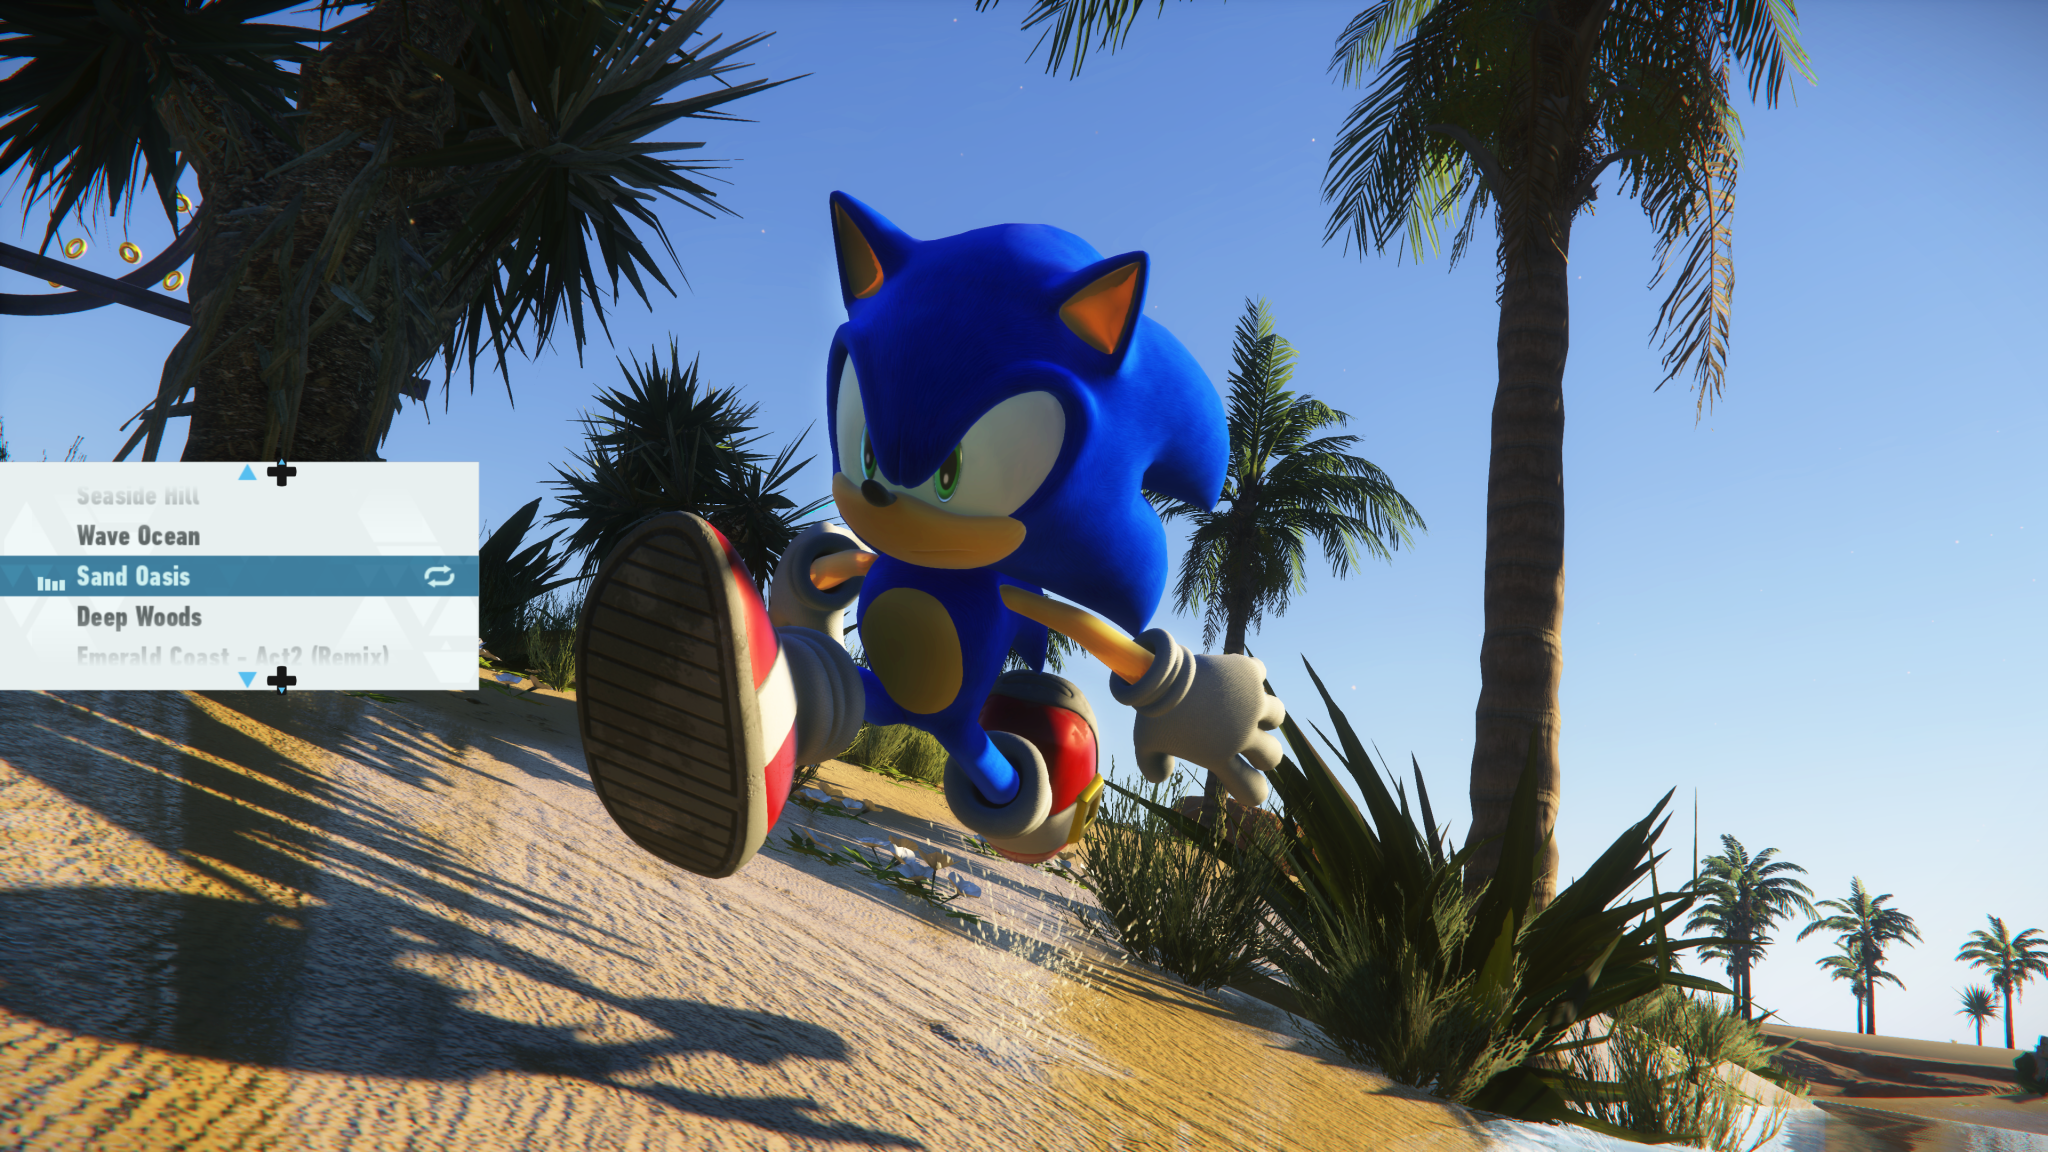 Sonic Frontiers update brings new Challenge mode, Photo Mode, and Jukebox  tracks March 22 – PlayStation.Blog